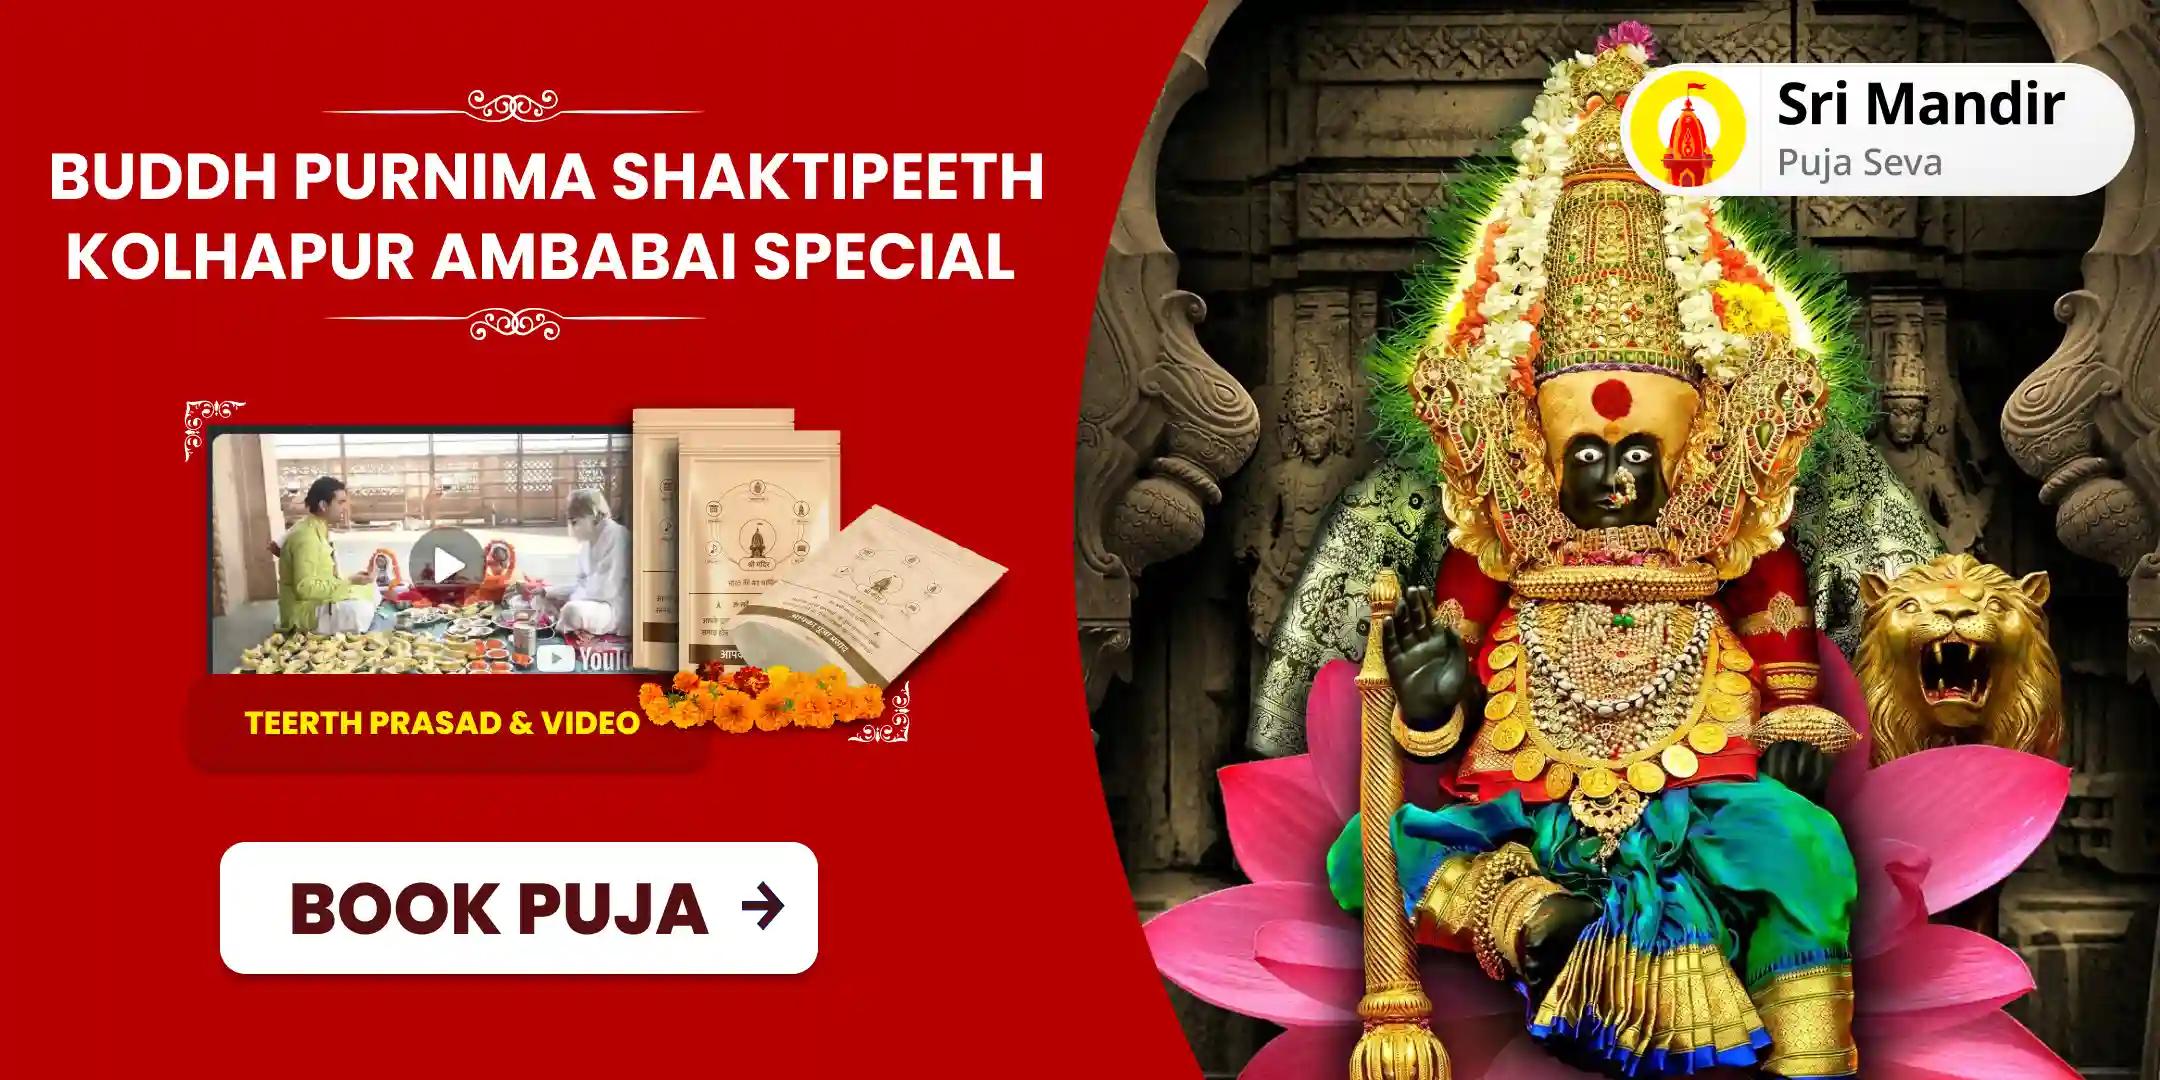 Buddh Purnima Shaktipeeth Kolhapur Ambabai Special Puja For Growth in Business and Career